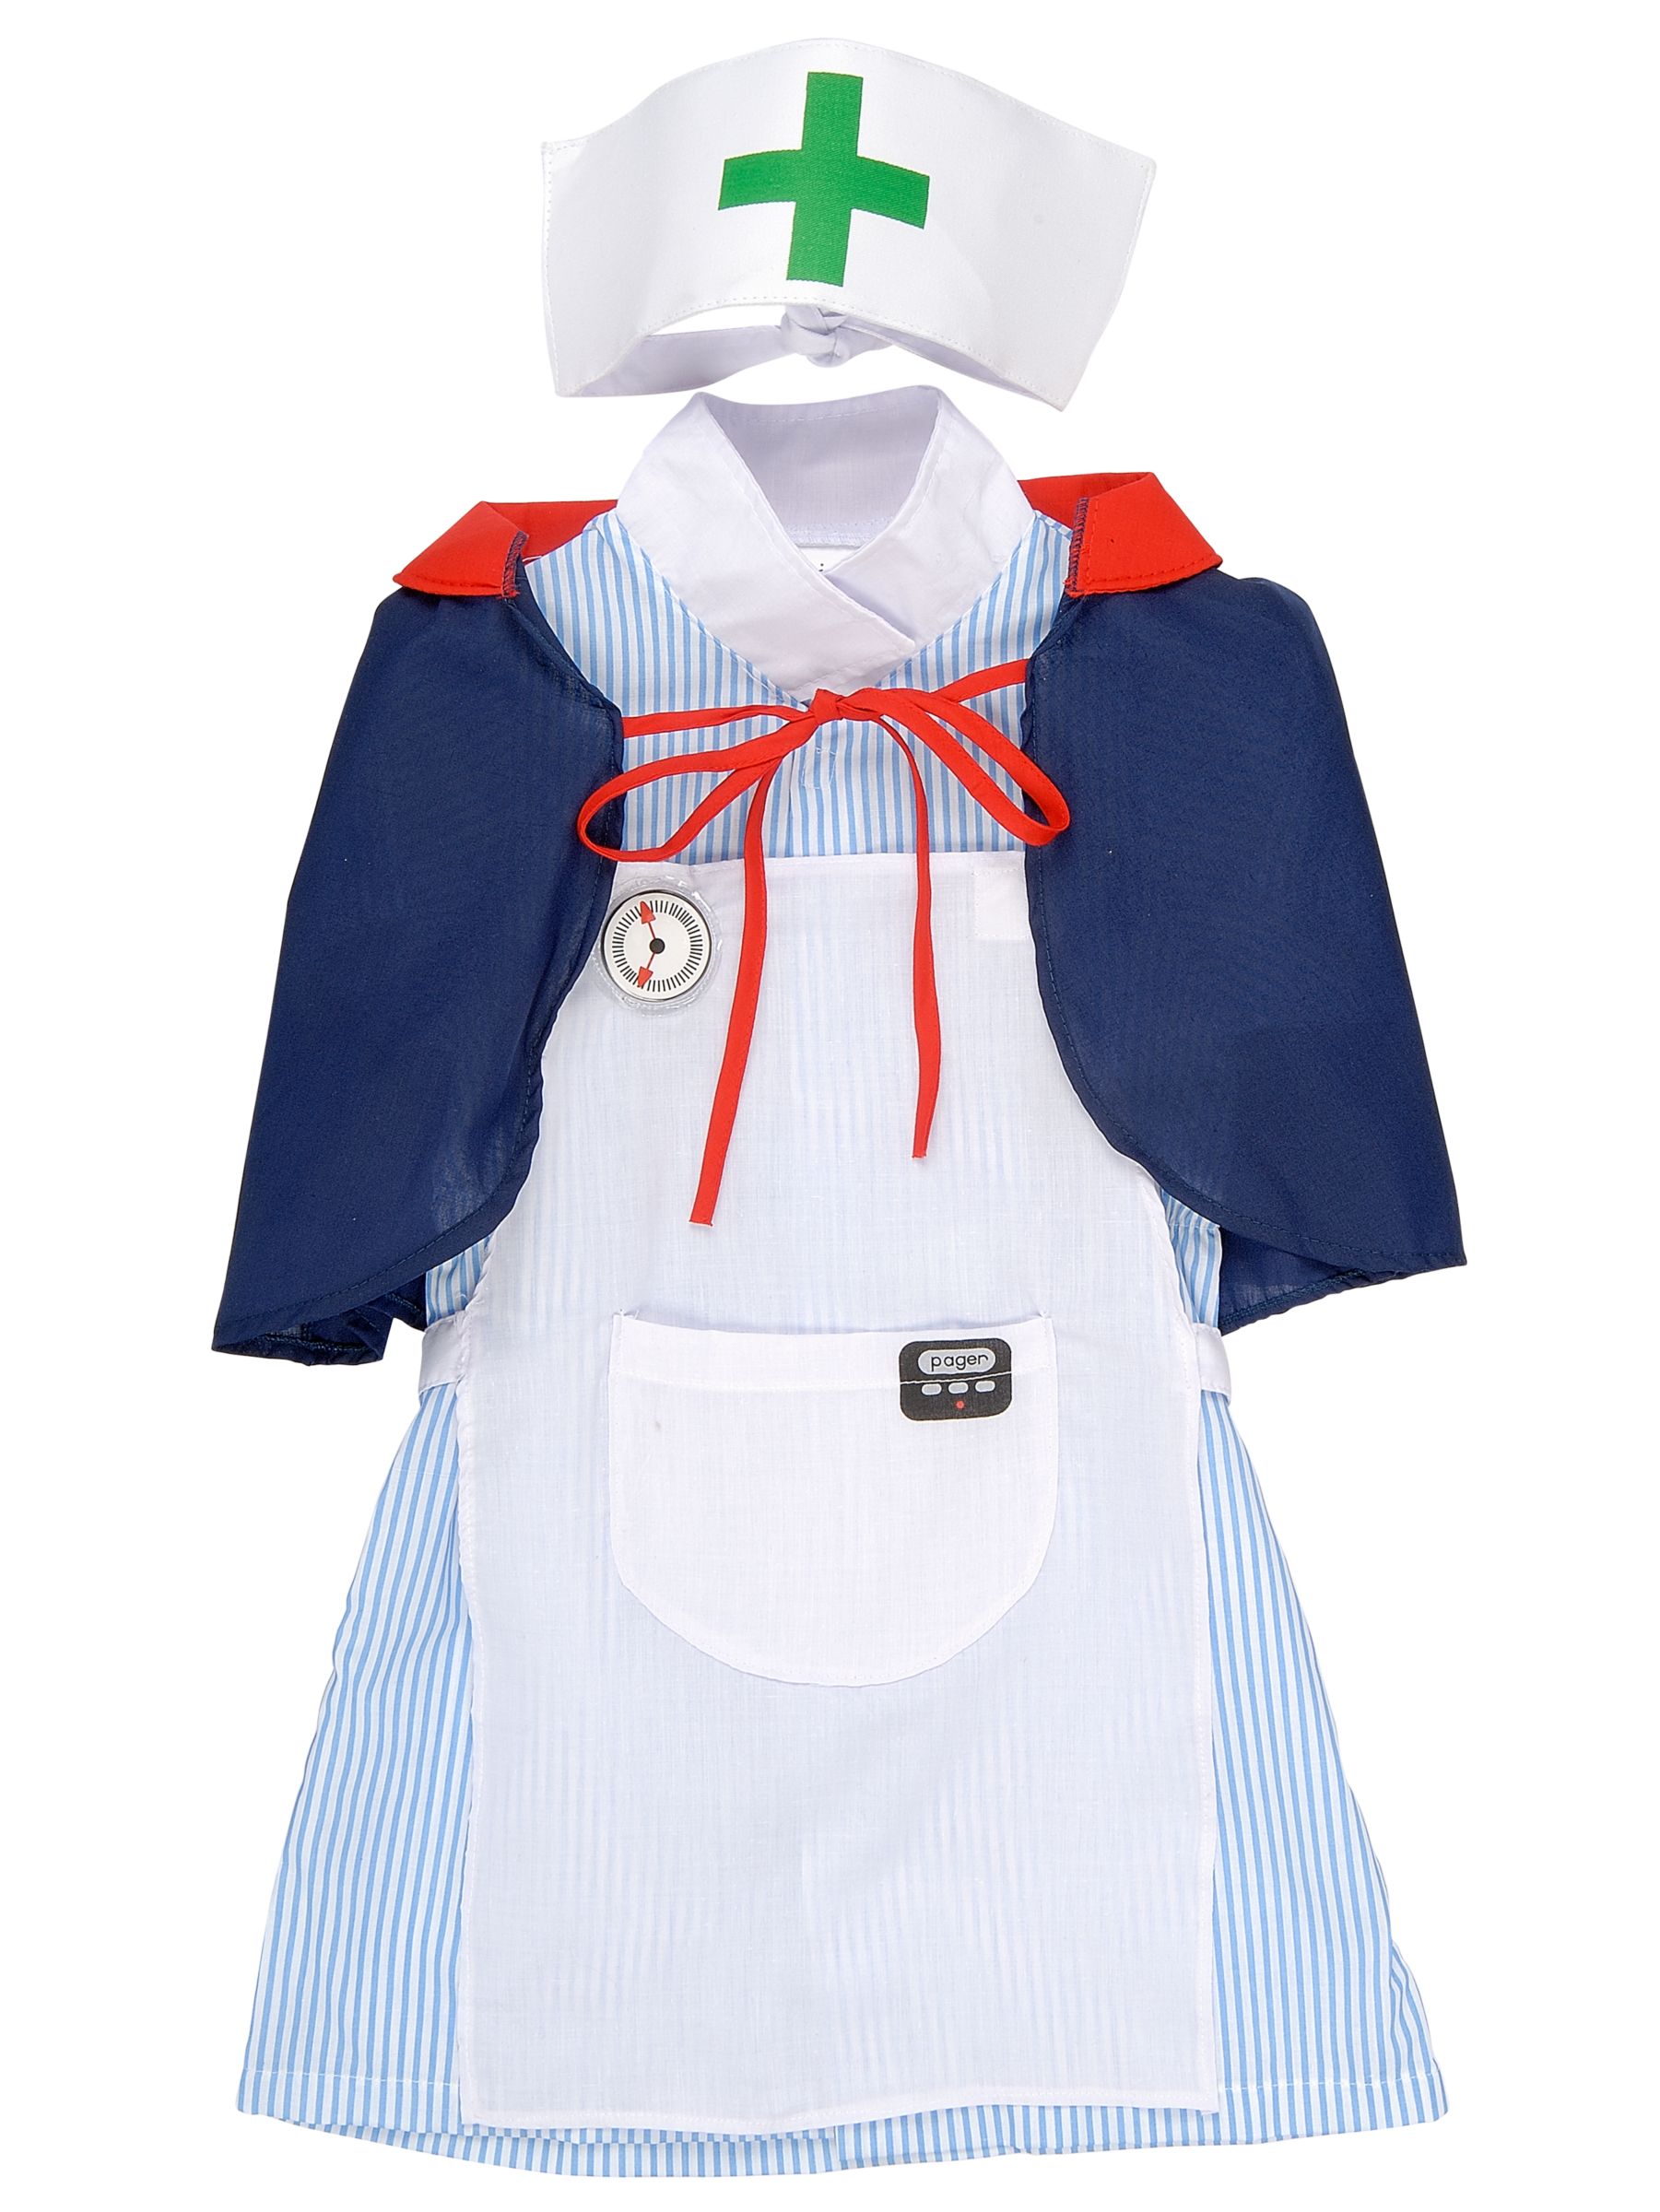 John Lewis Mischief Dressing Up Nurse Outfit, 3-5 years